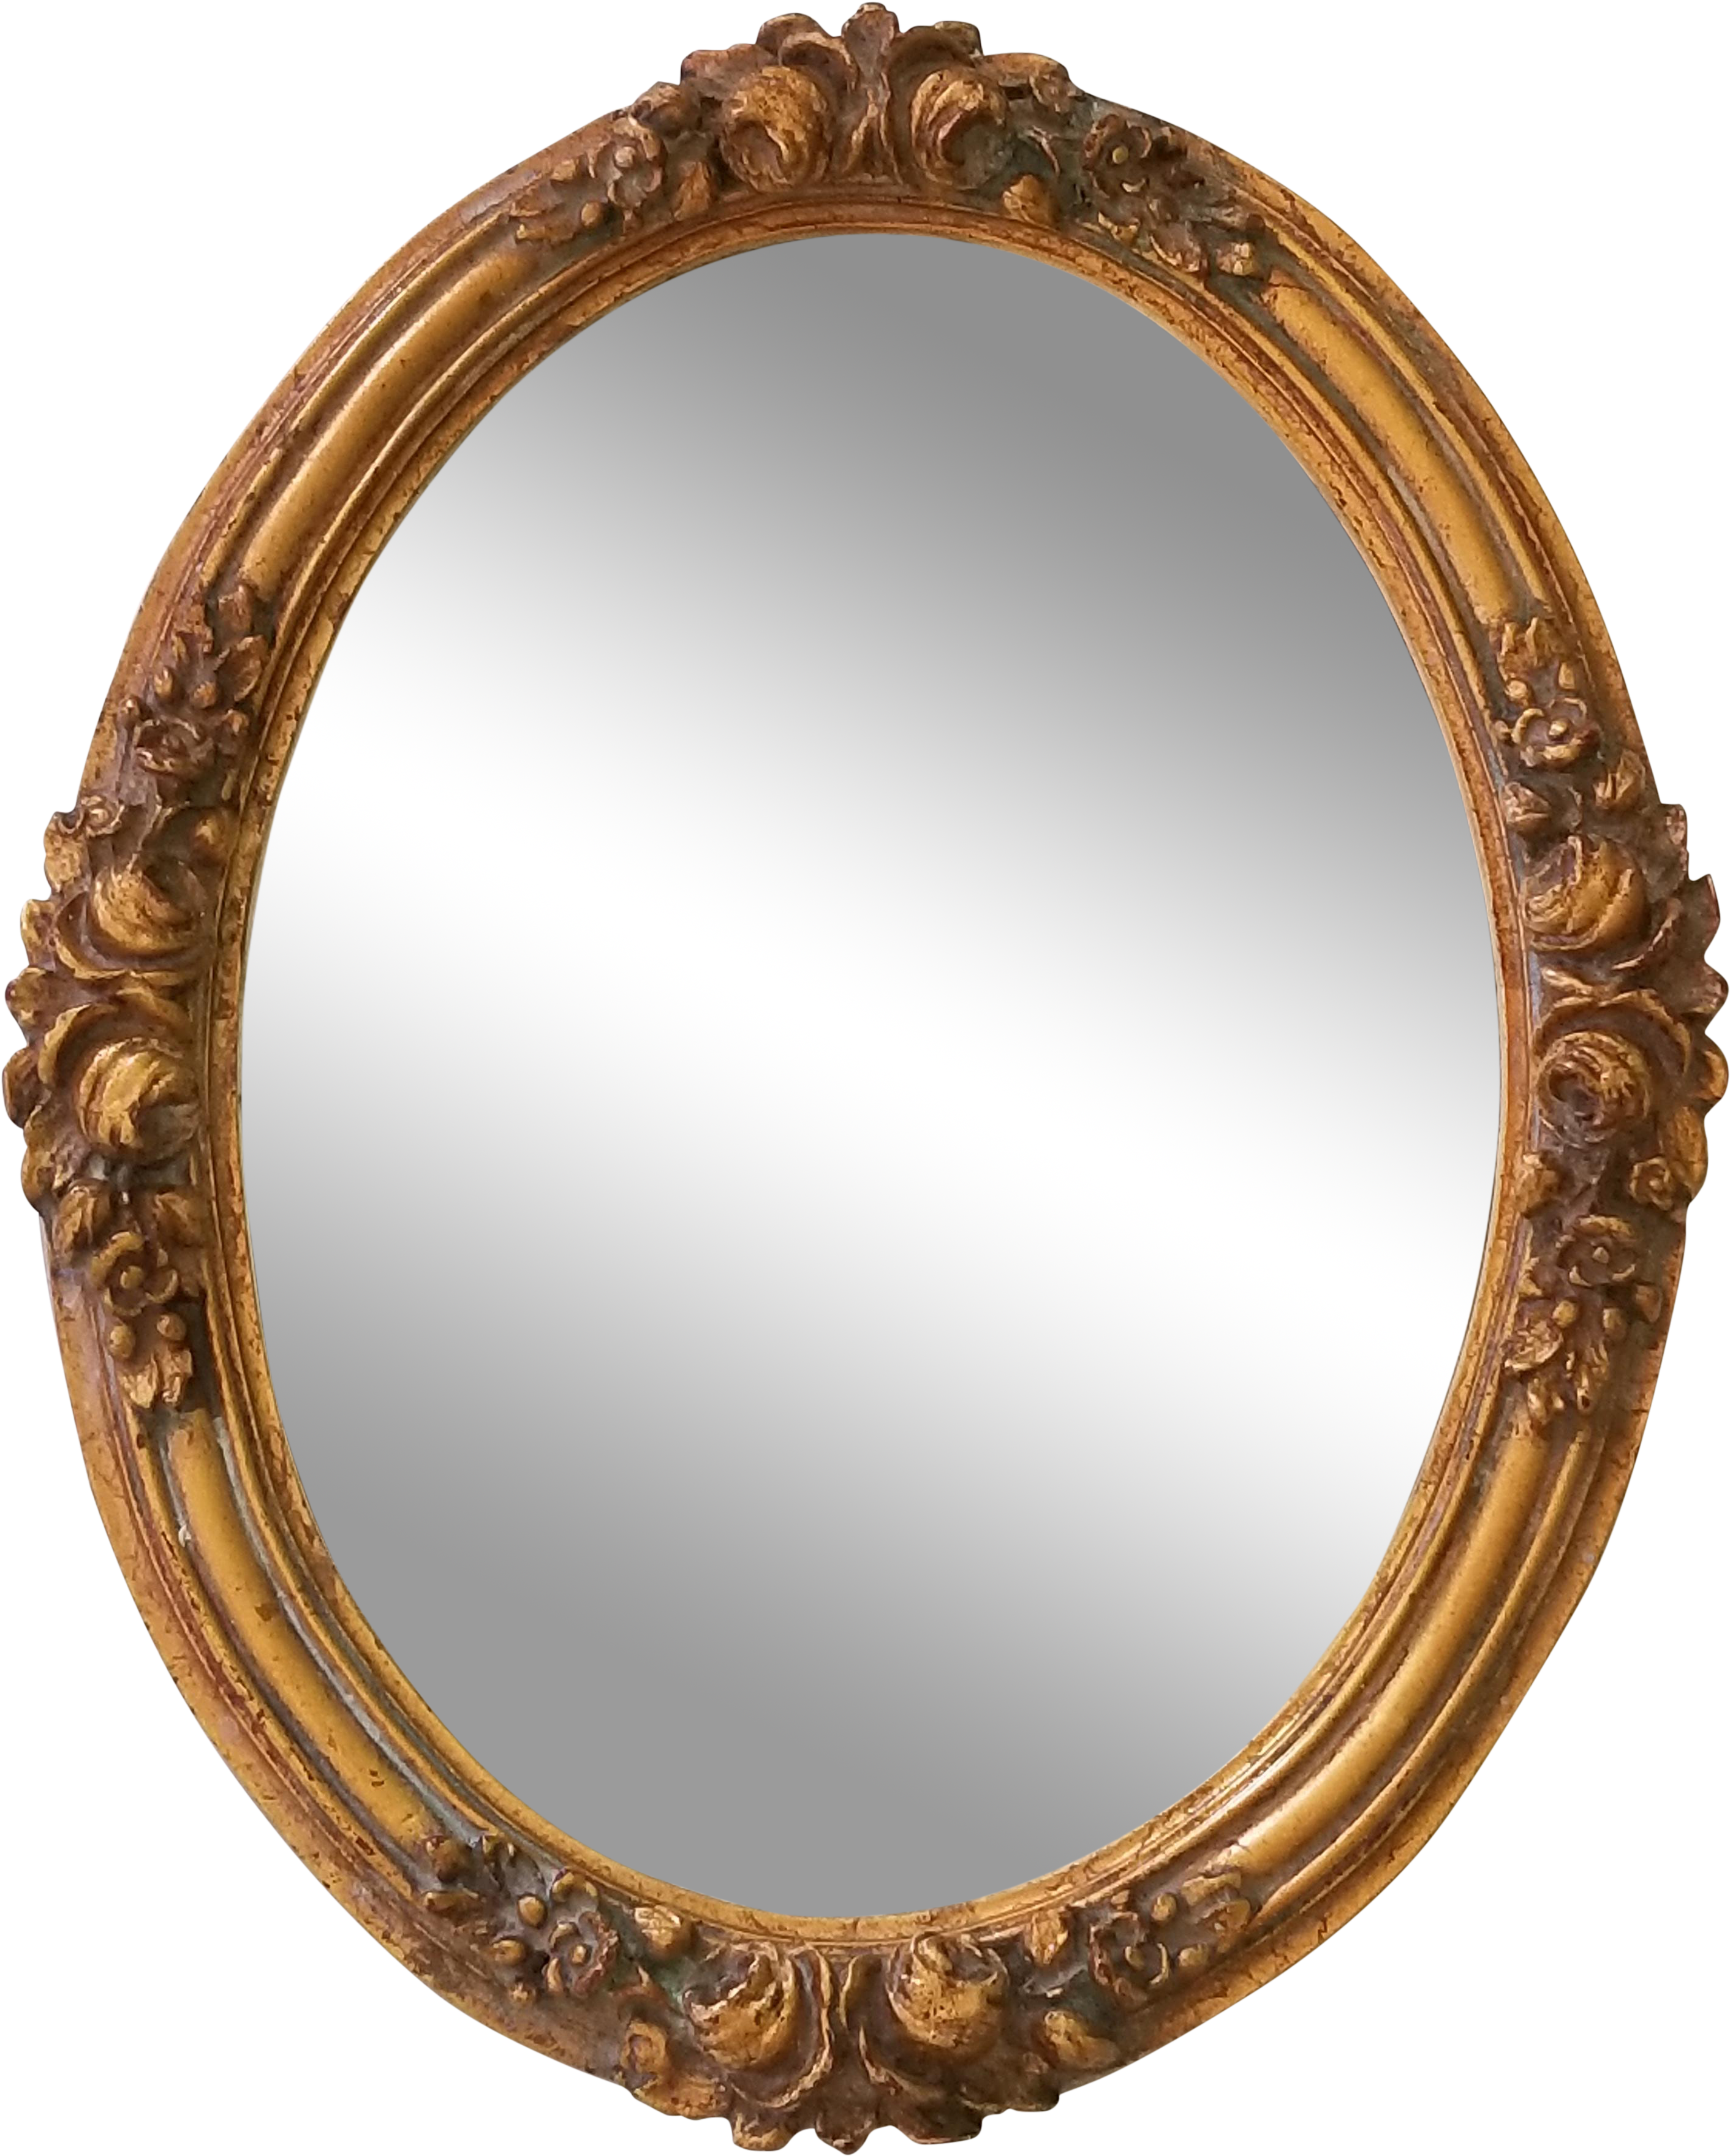 Vintage French Provincial Style Oval Gilt Mirror Chairish